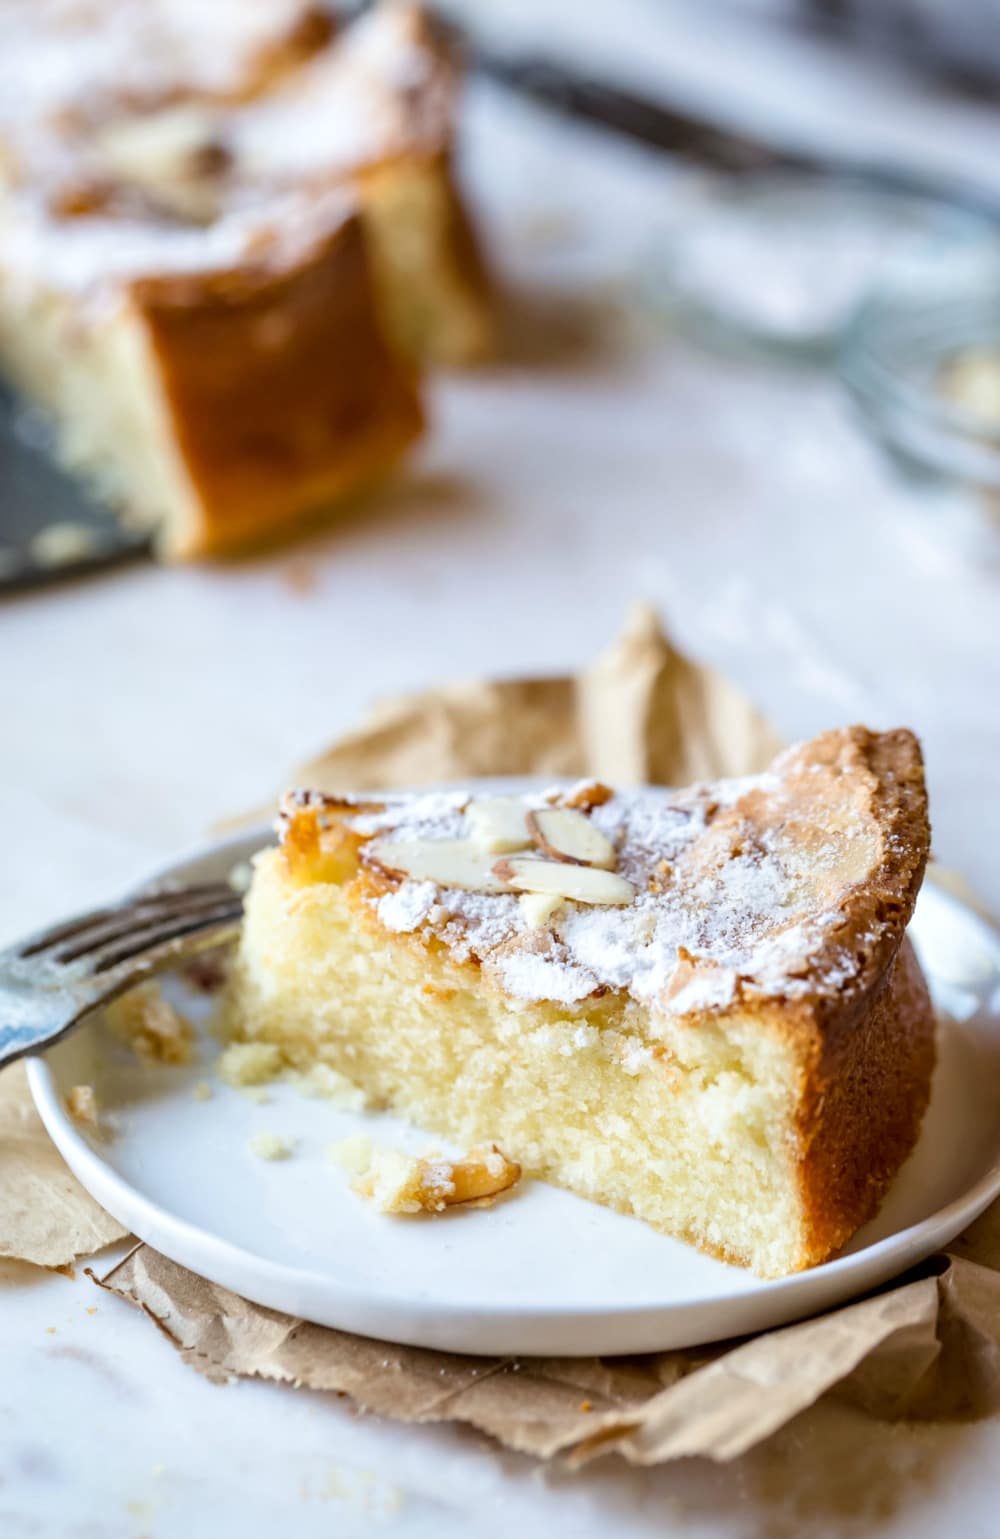 Slice of olive oil cake topped with powdered sugar and sliced almonds